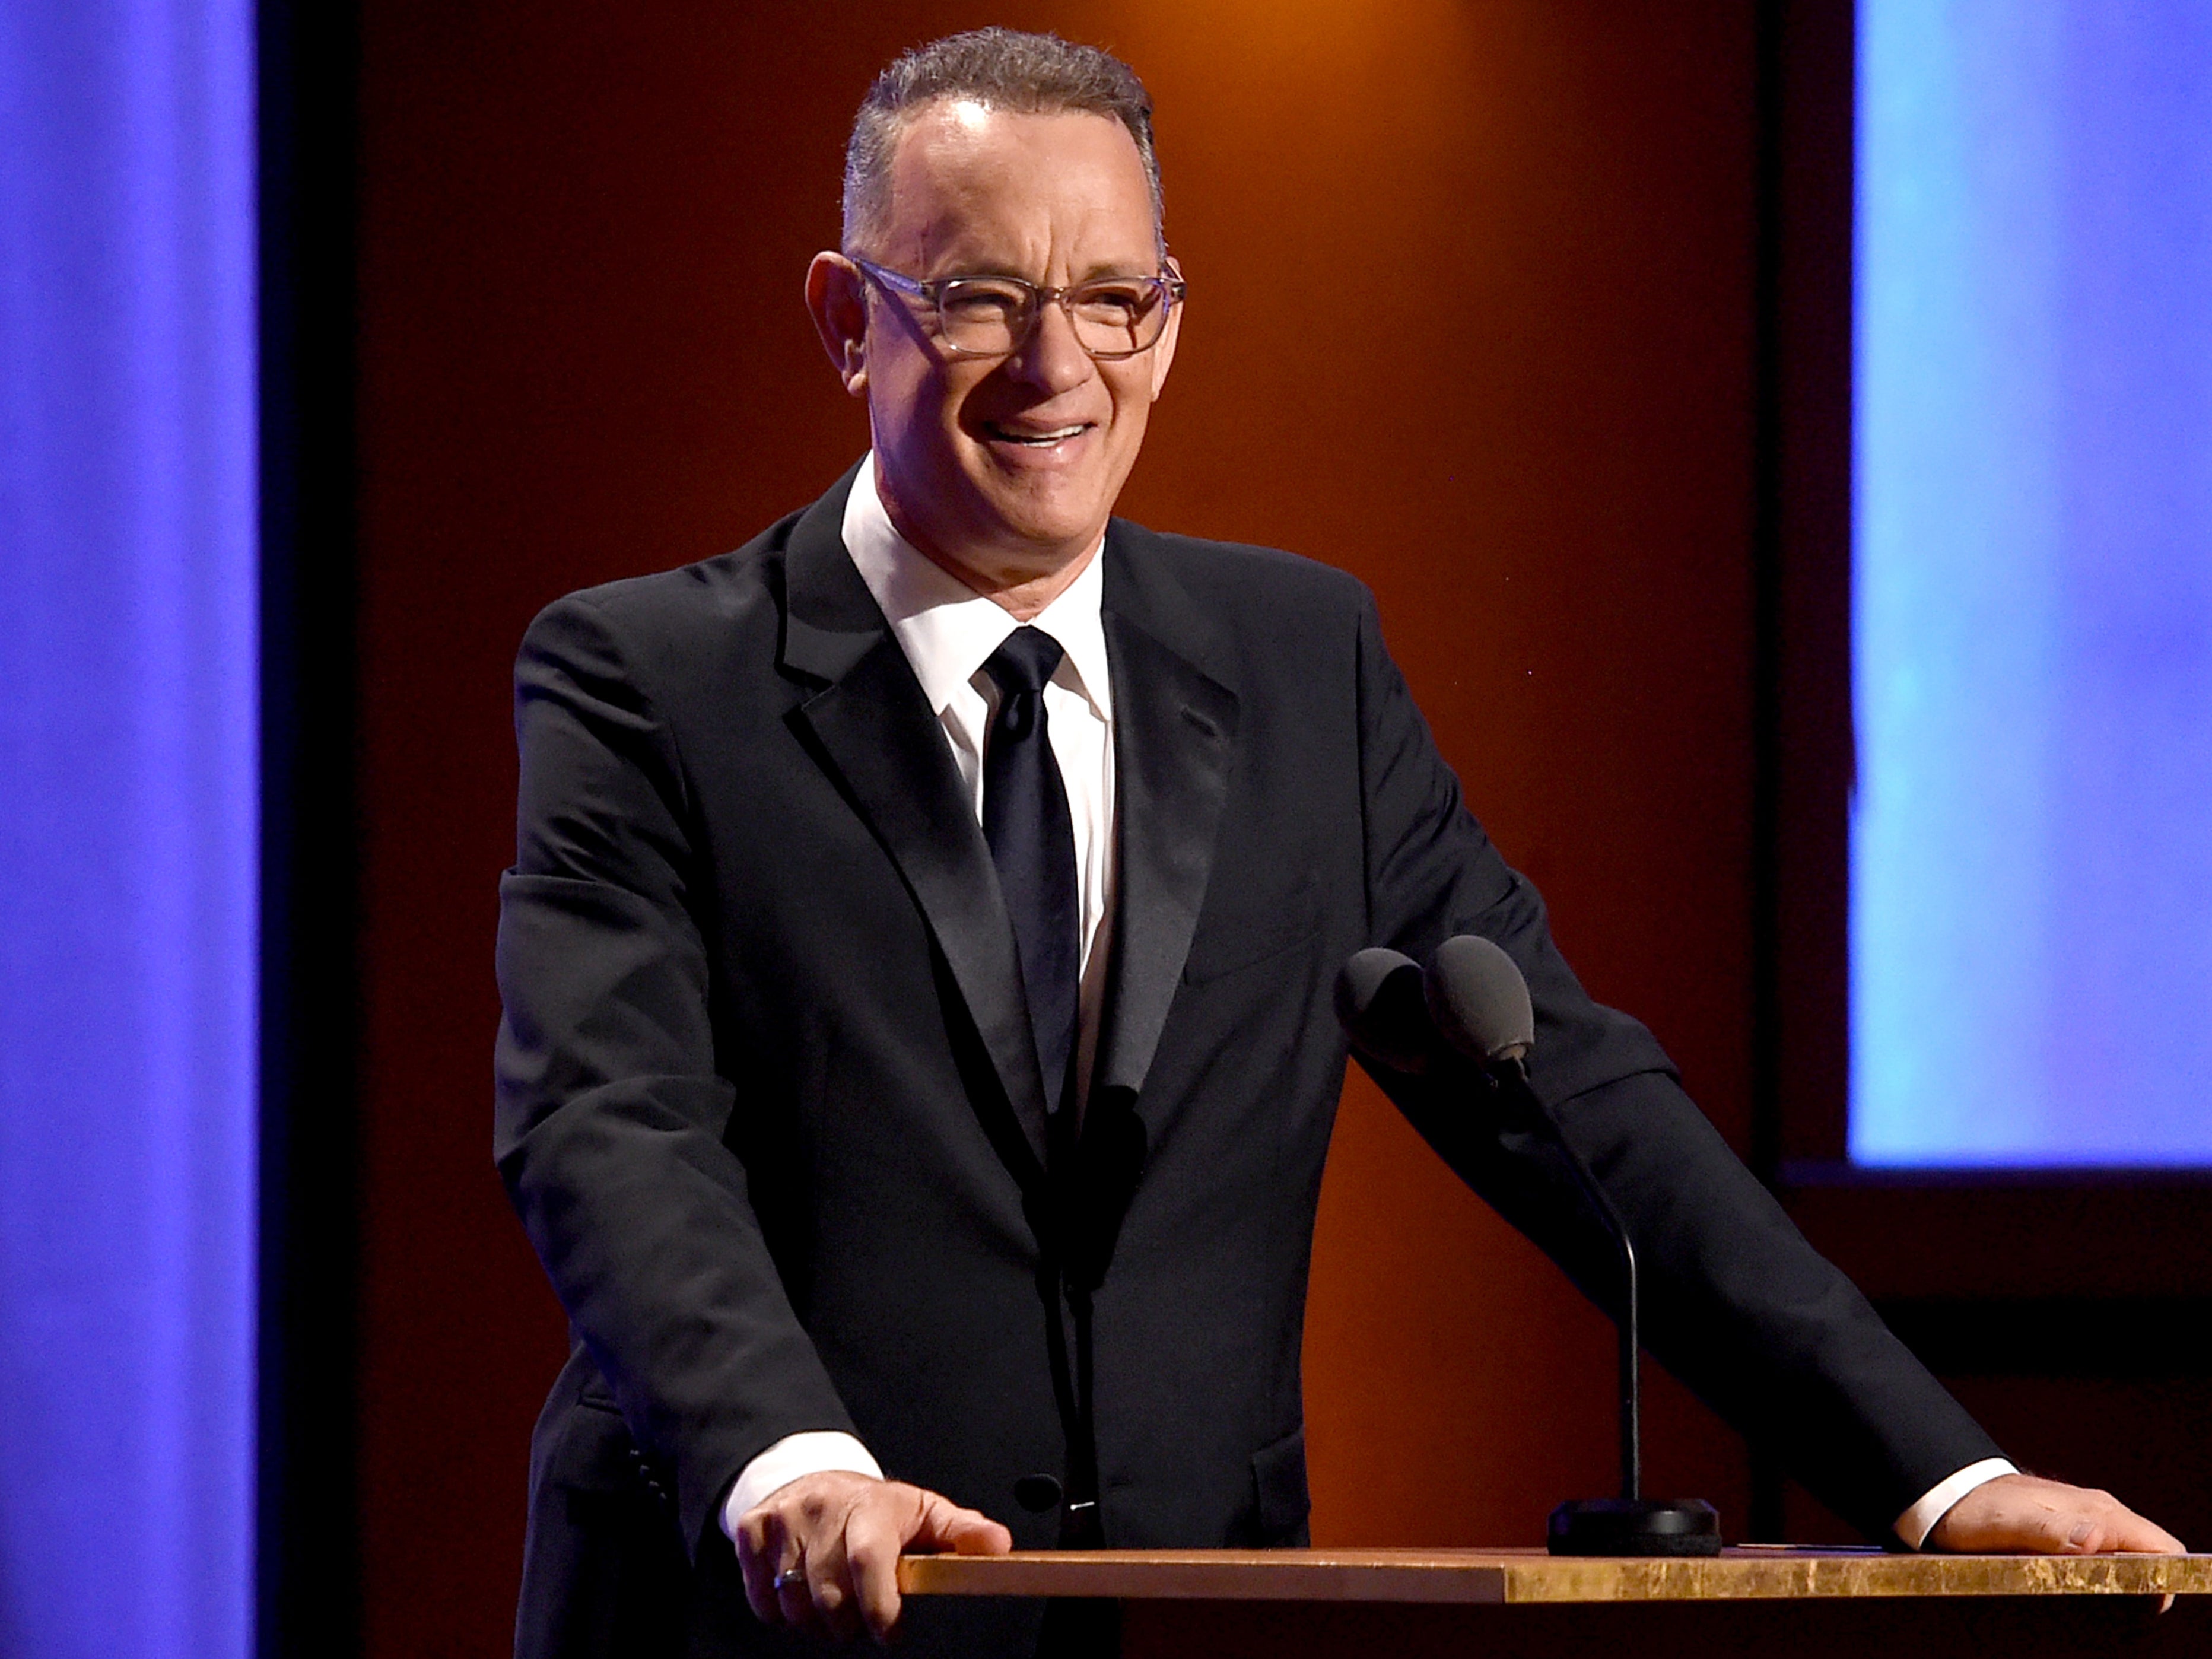 Tom Hanks to host televised inauguration special featuring Justin Timberlake and Demi Lovato.